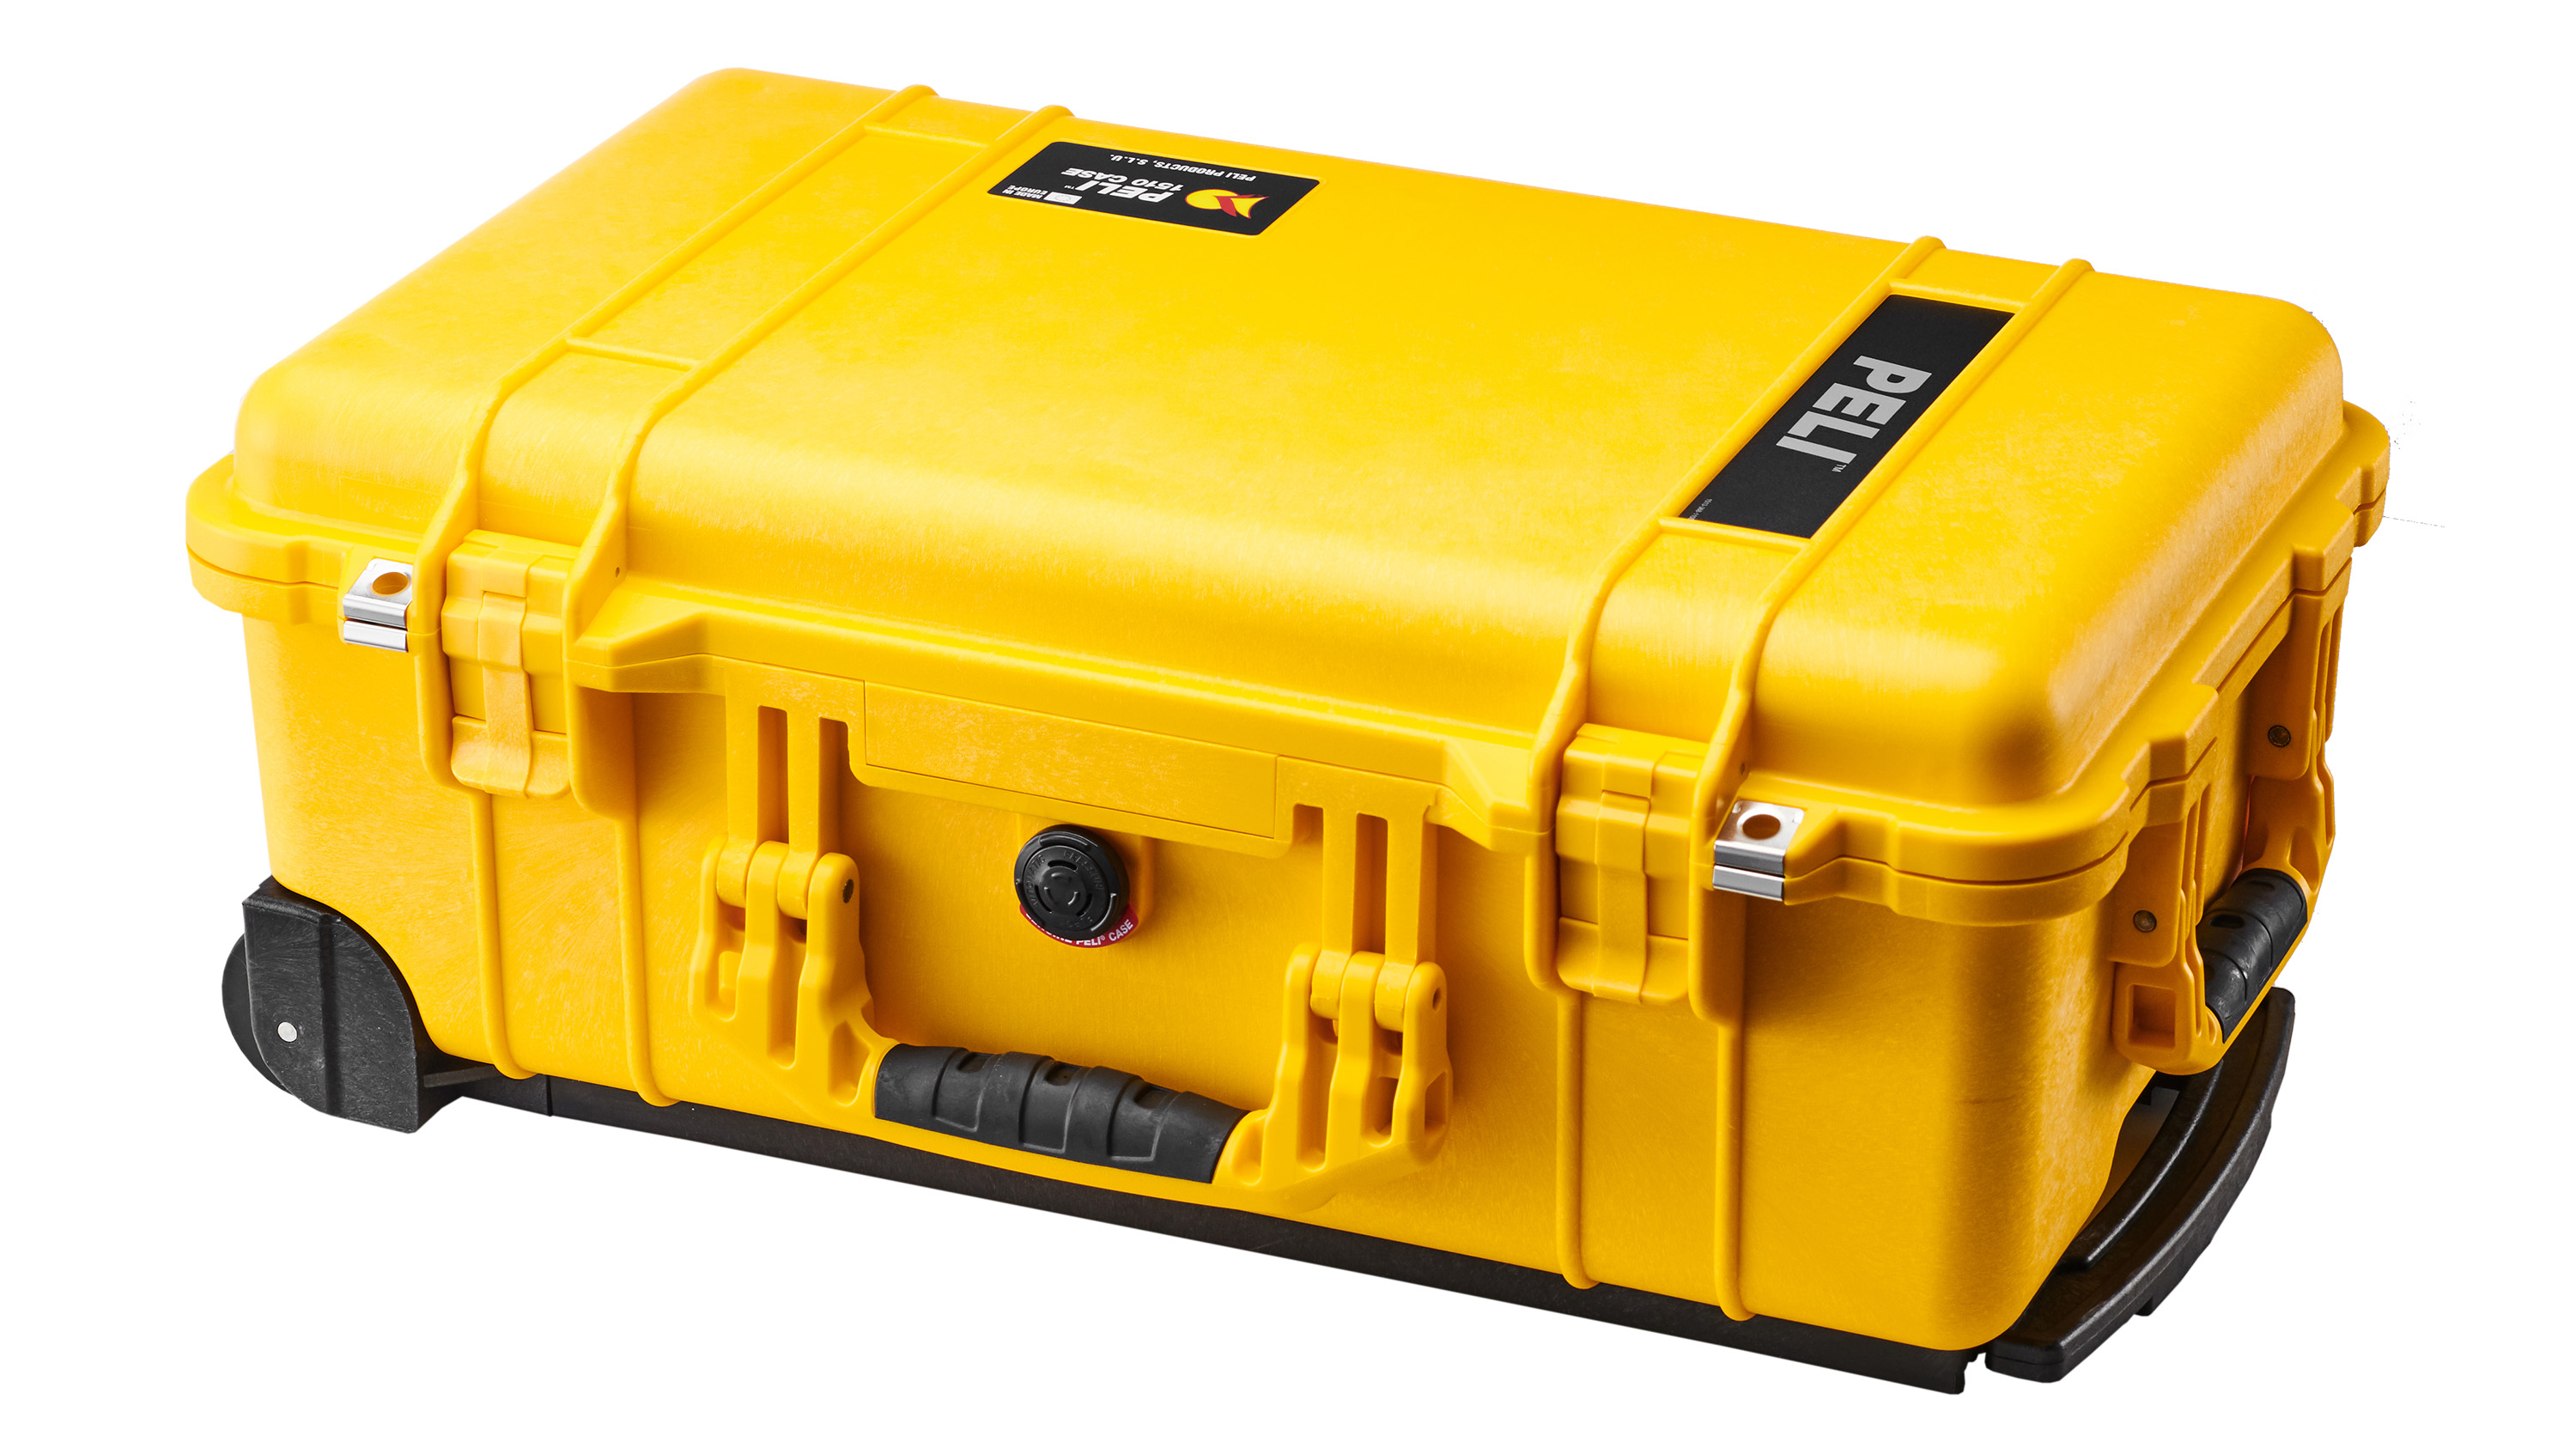 Pelican Air 1535 Rolling Hard Case with TrekPak Dividers Review: Digital  Photography Review